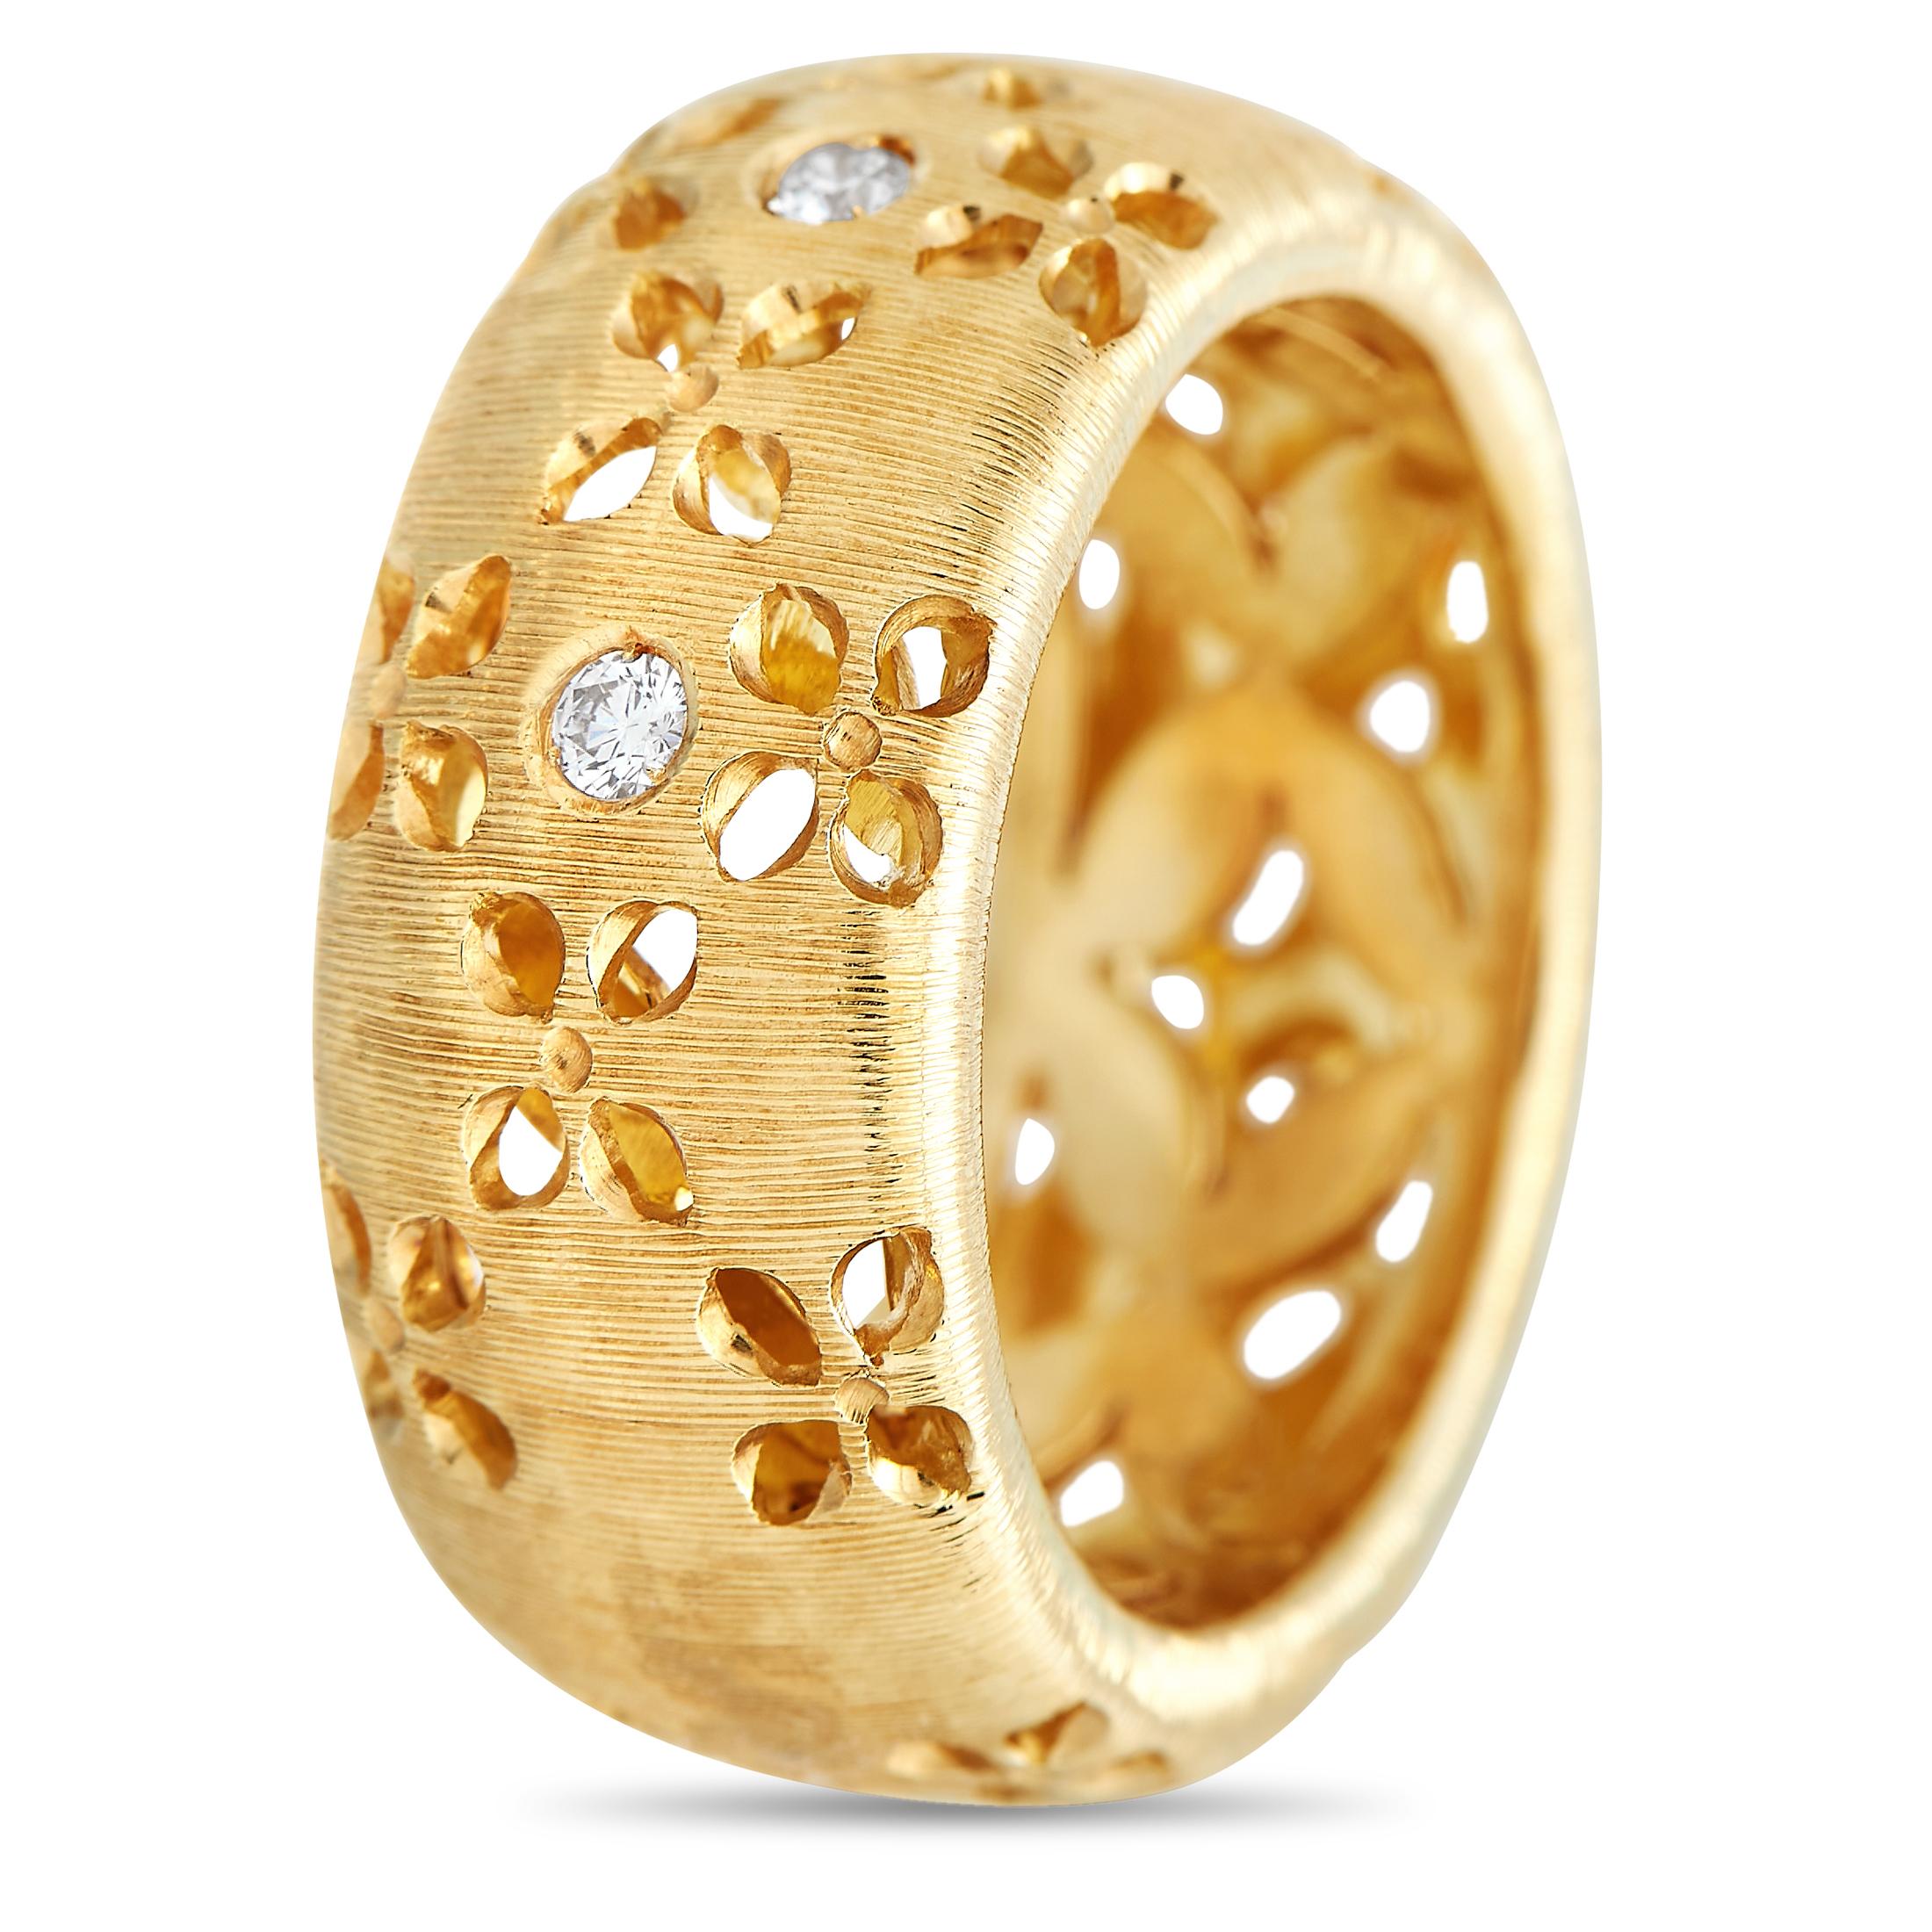 From the retired Granada Collection, this Roberto Coin creation displays the renowned Italian jeweler's mastery of the art of being different. The ring boasts a 10mm-thick band with a heavily brushed finish. Perforations in floral motifs give